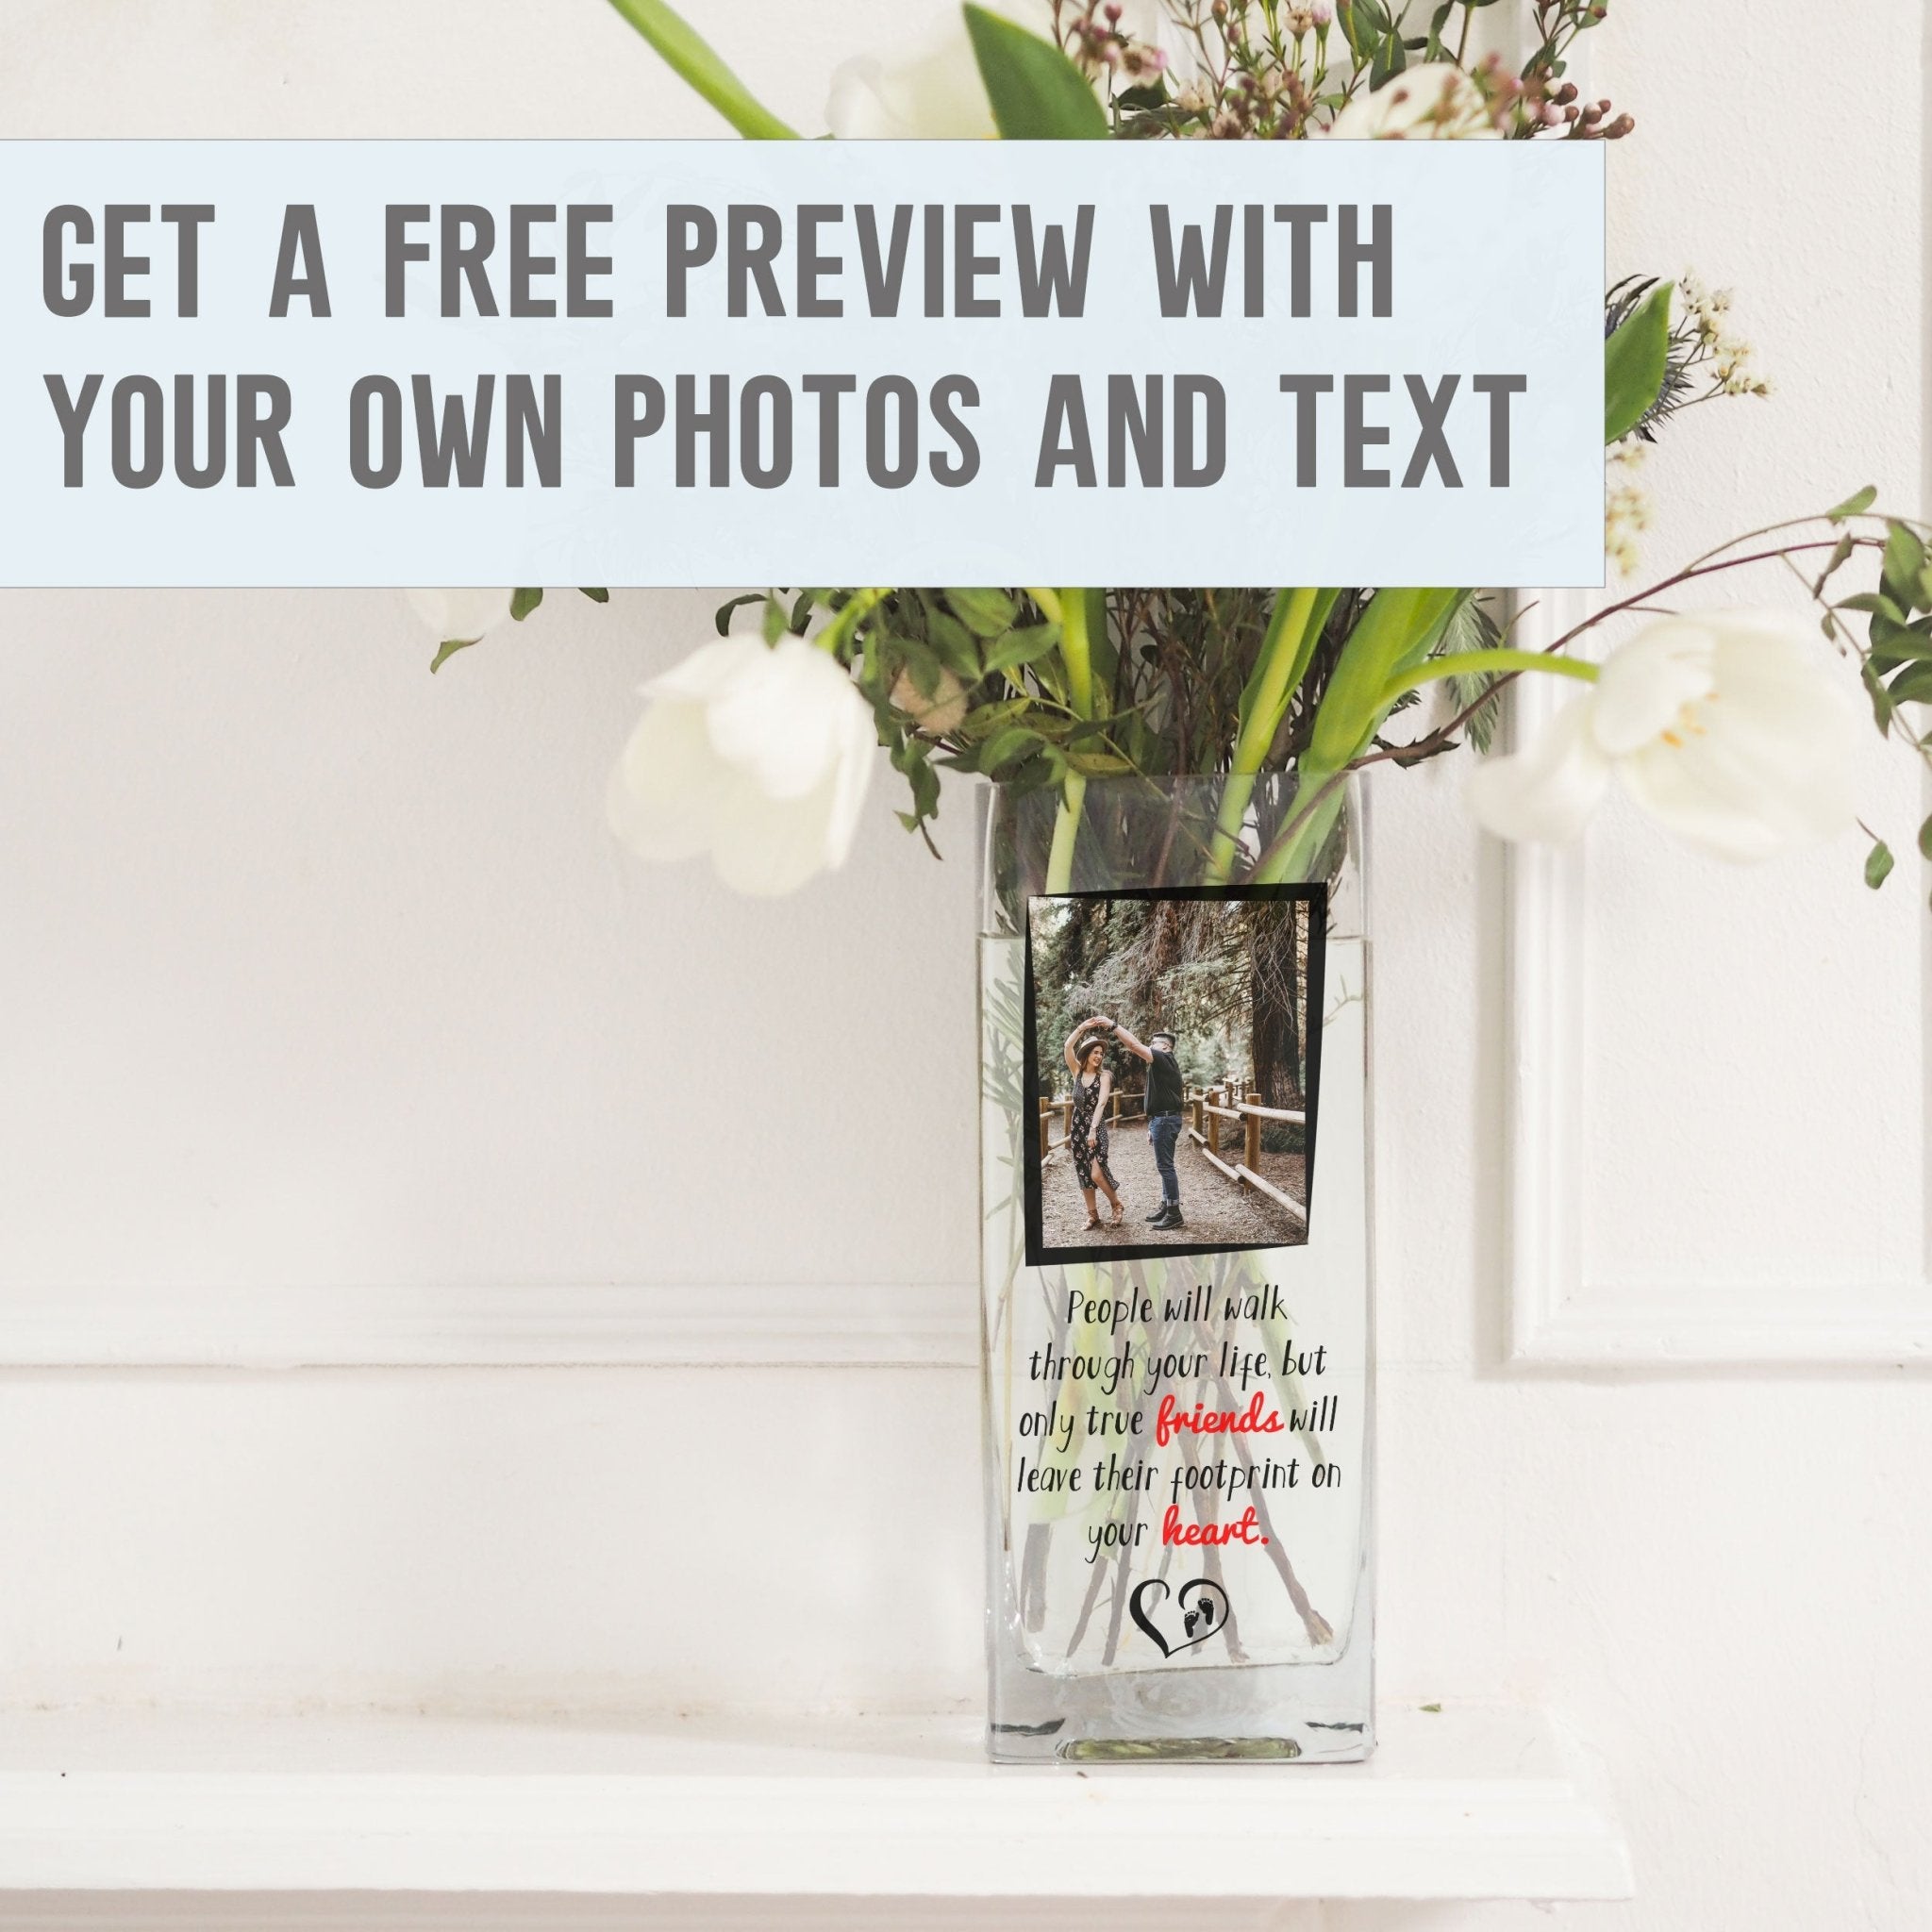 Best Friend Customized Photo Glass Vase | Pal Quotation Cadre Gift Ideas | Personalised Flower Stand with Picture | Crystal Decor Present Vase - Unique Prints